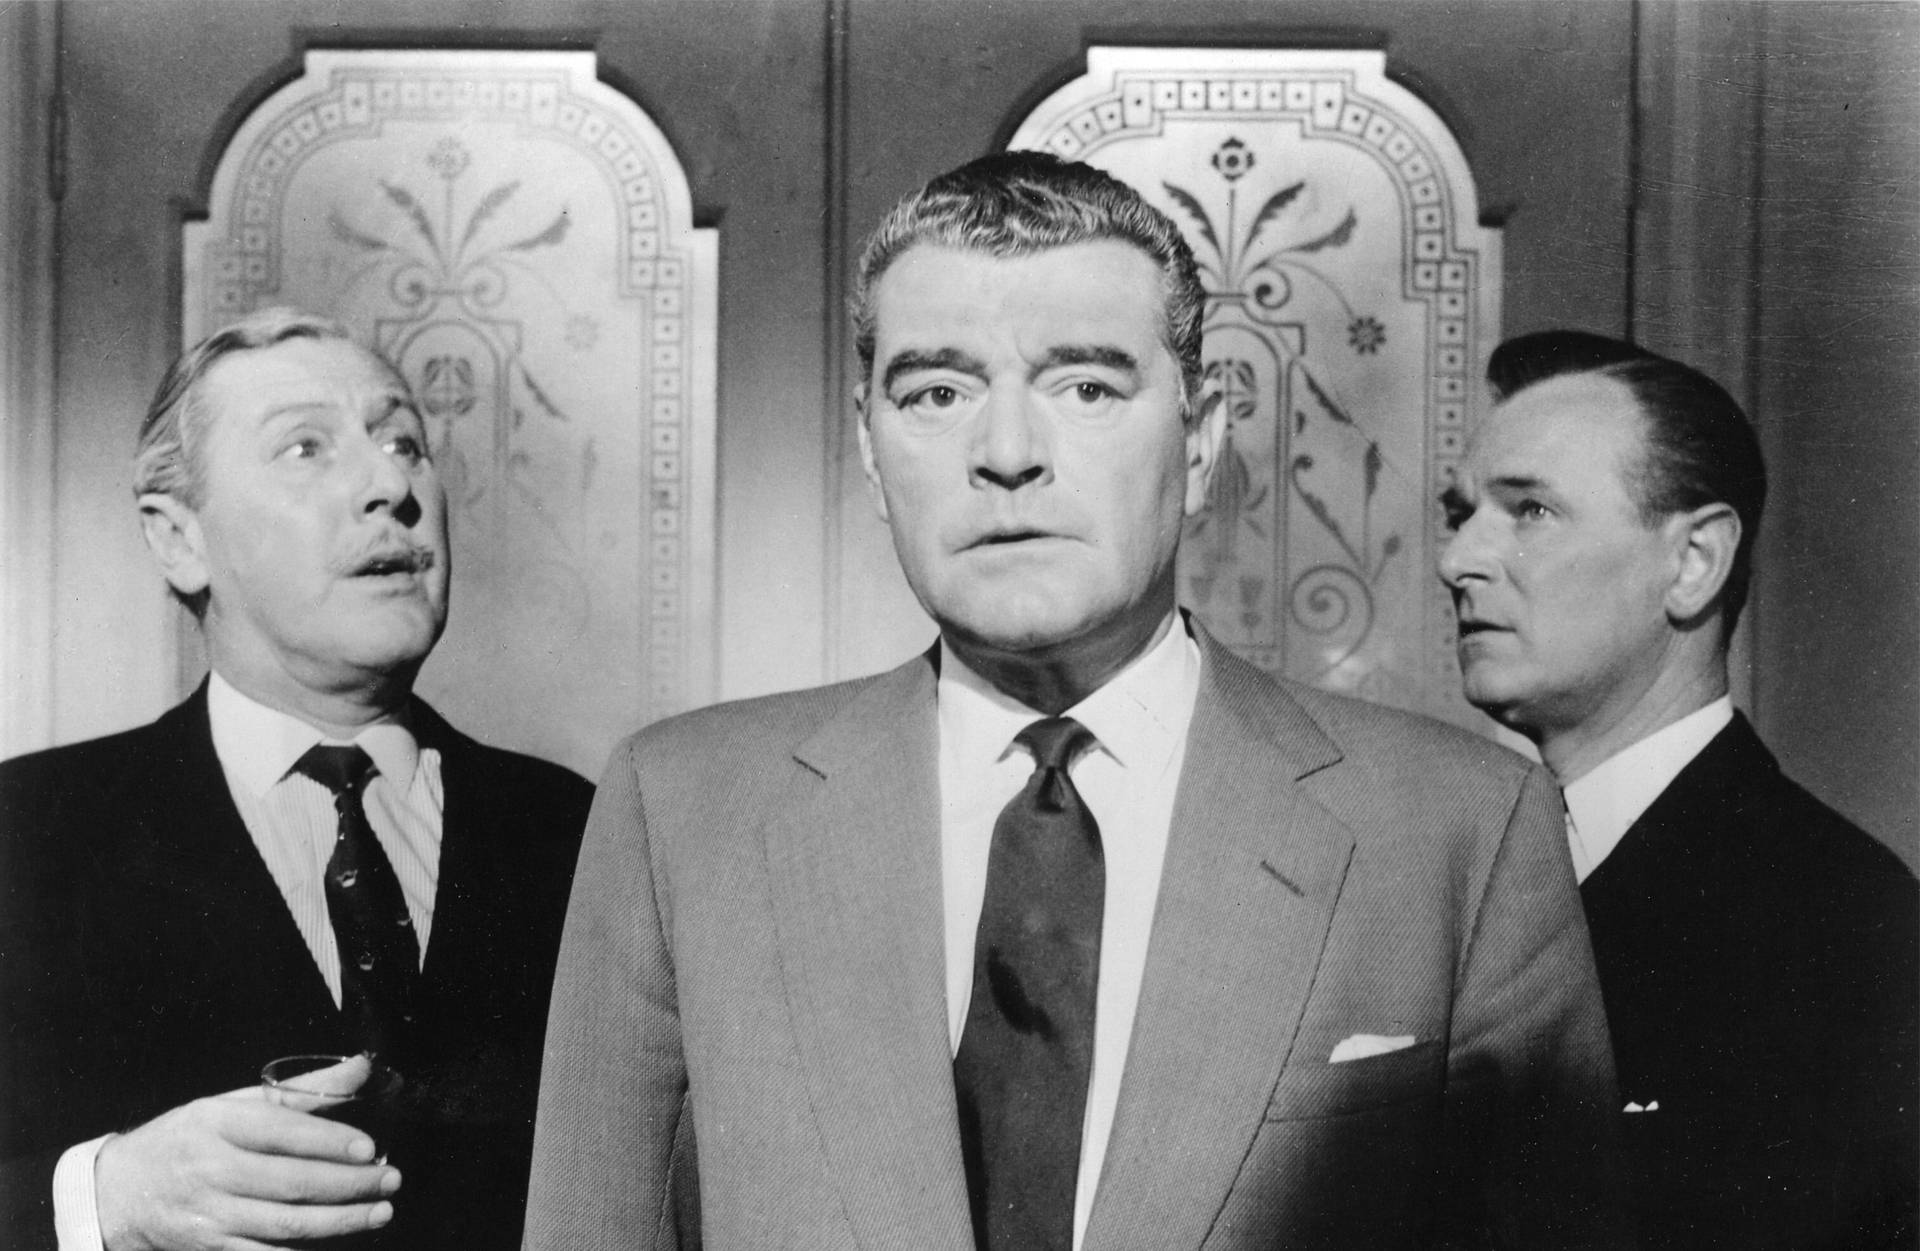 Vintage shot of renowned English actor Jack Hawkins from the film "The League of Gentlemen" Wallpaper